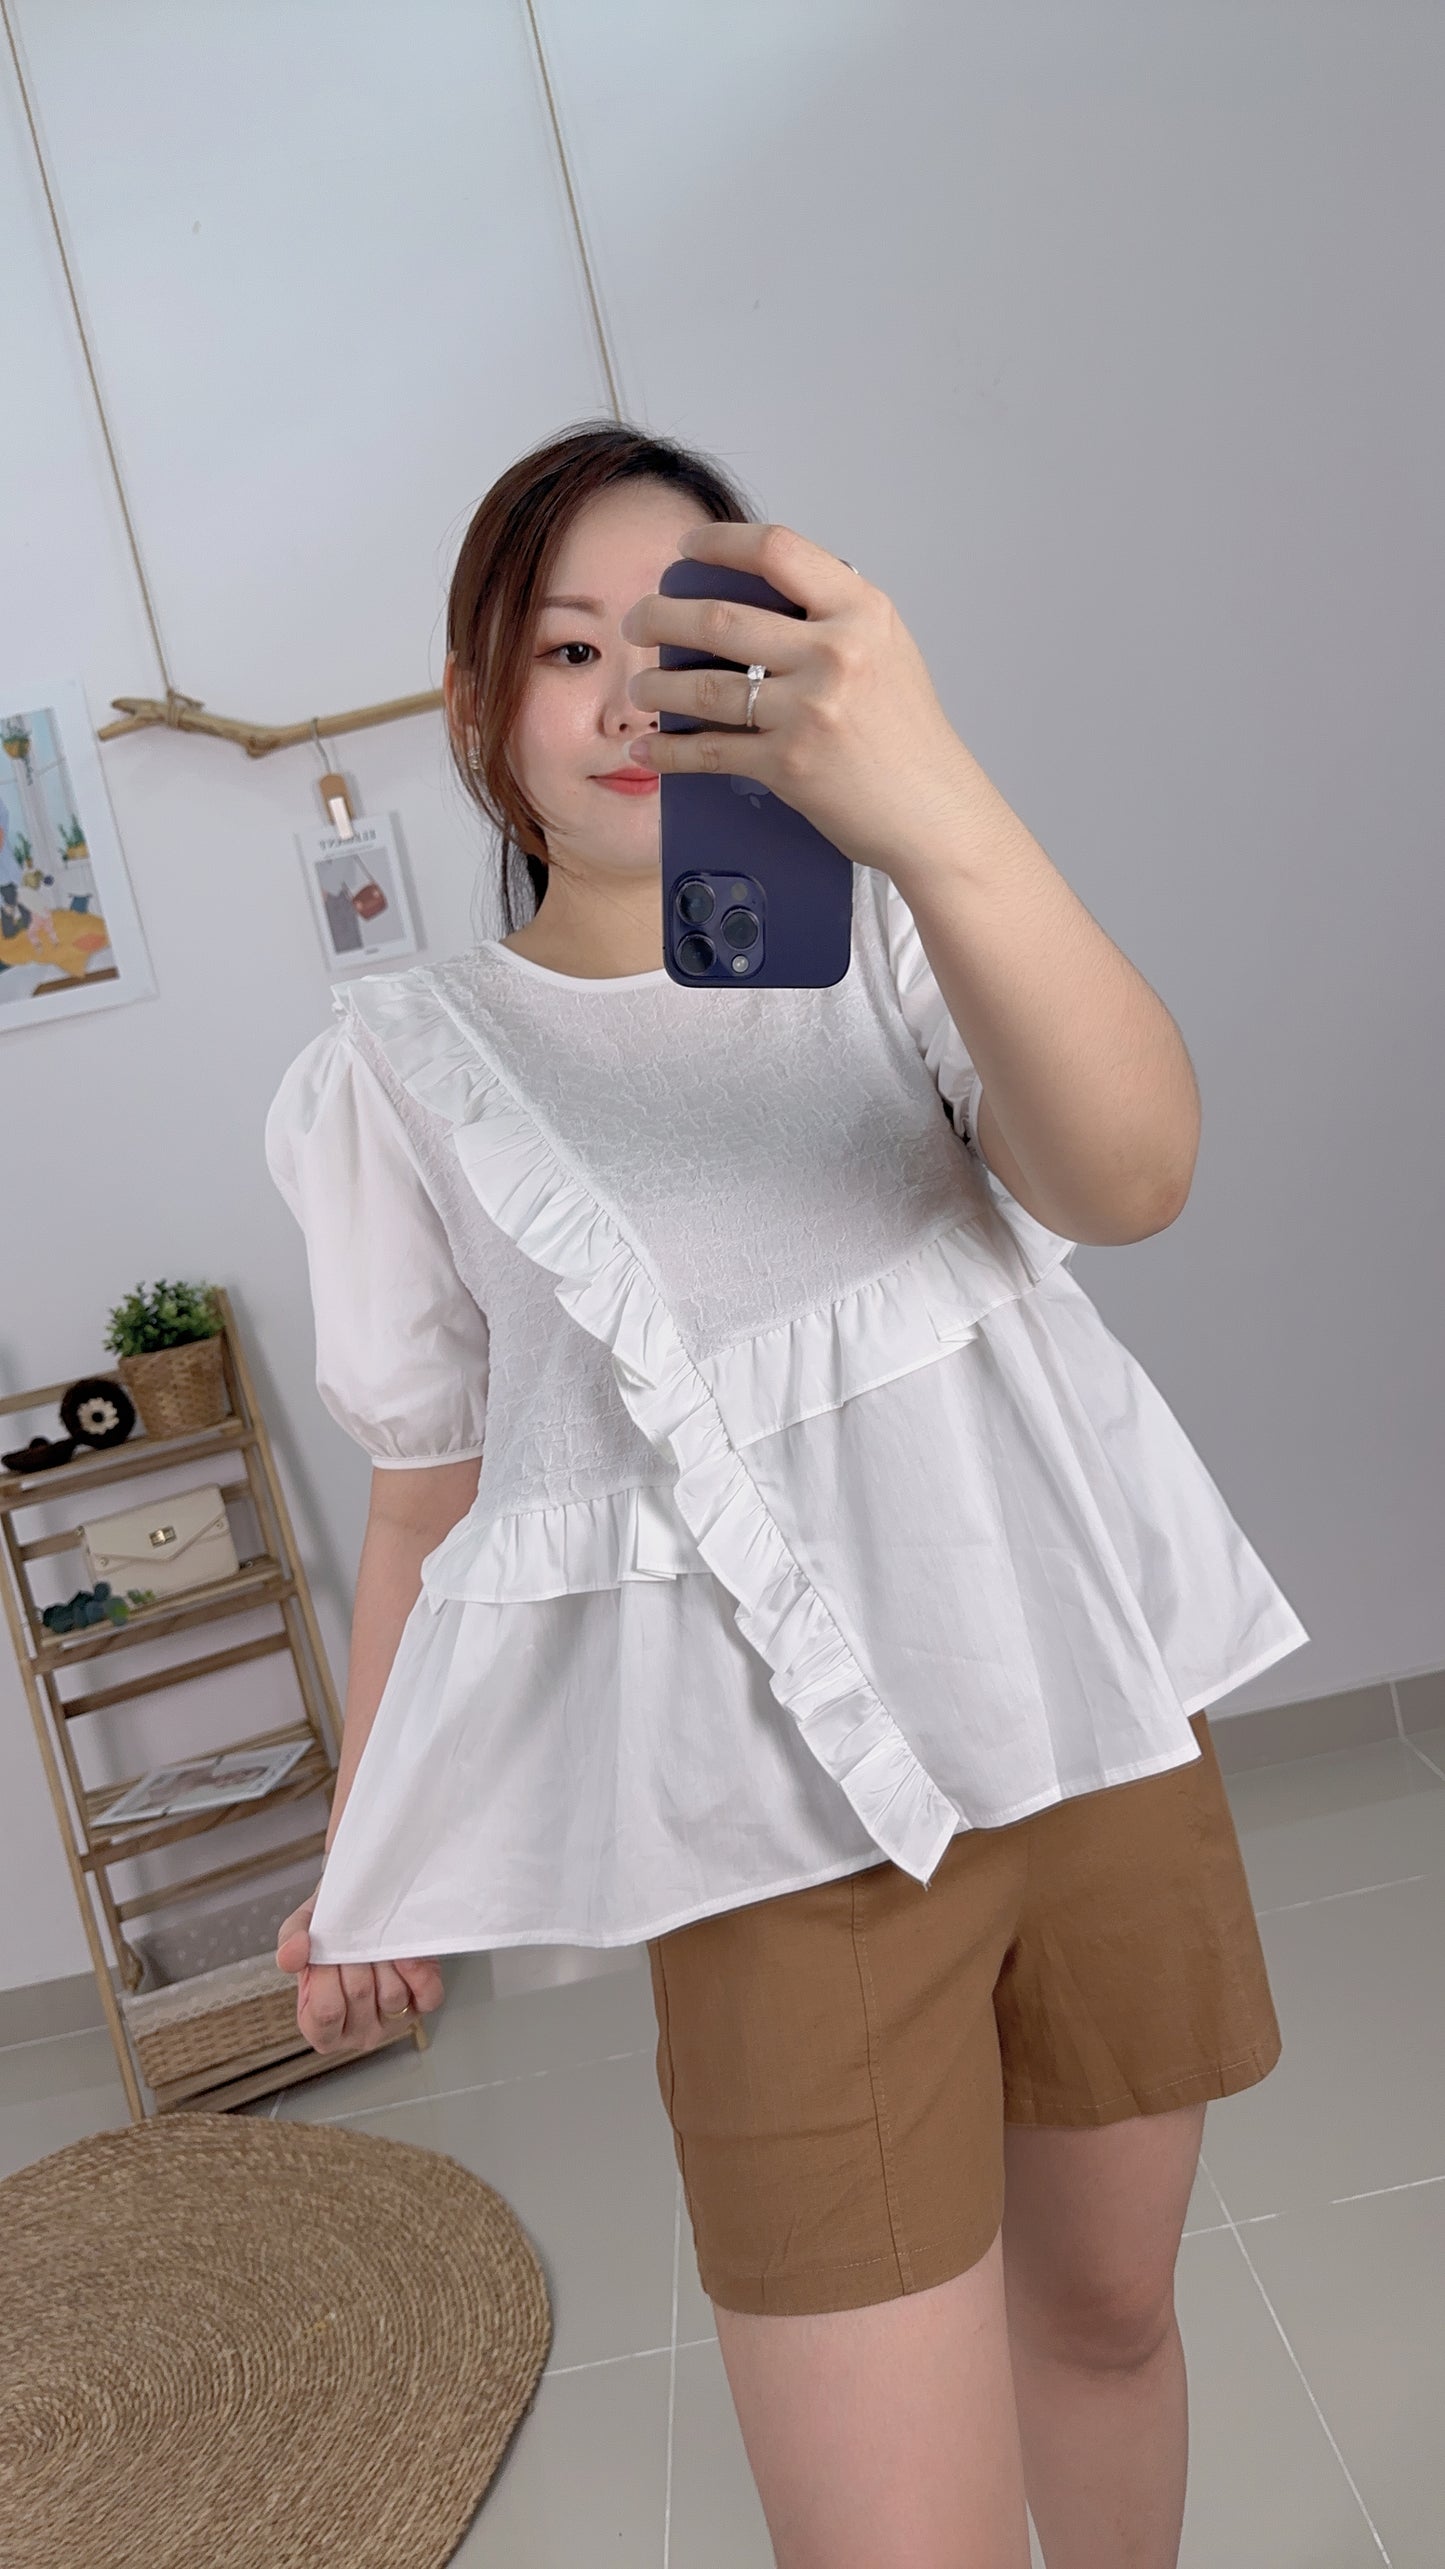 Vylia Sleeved Top in White